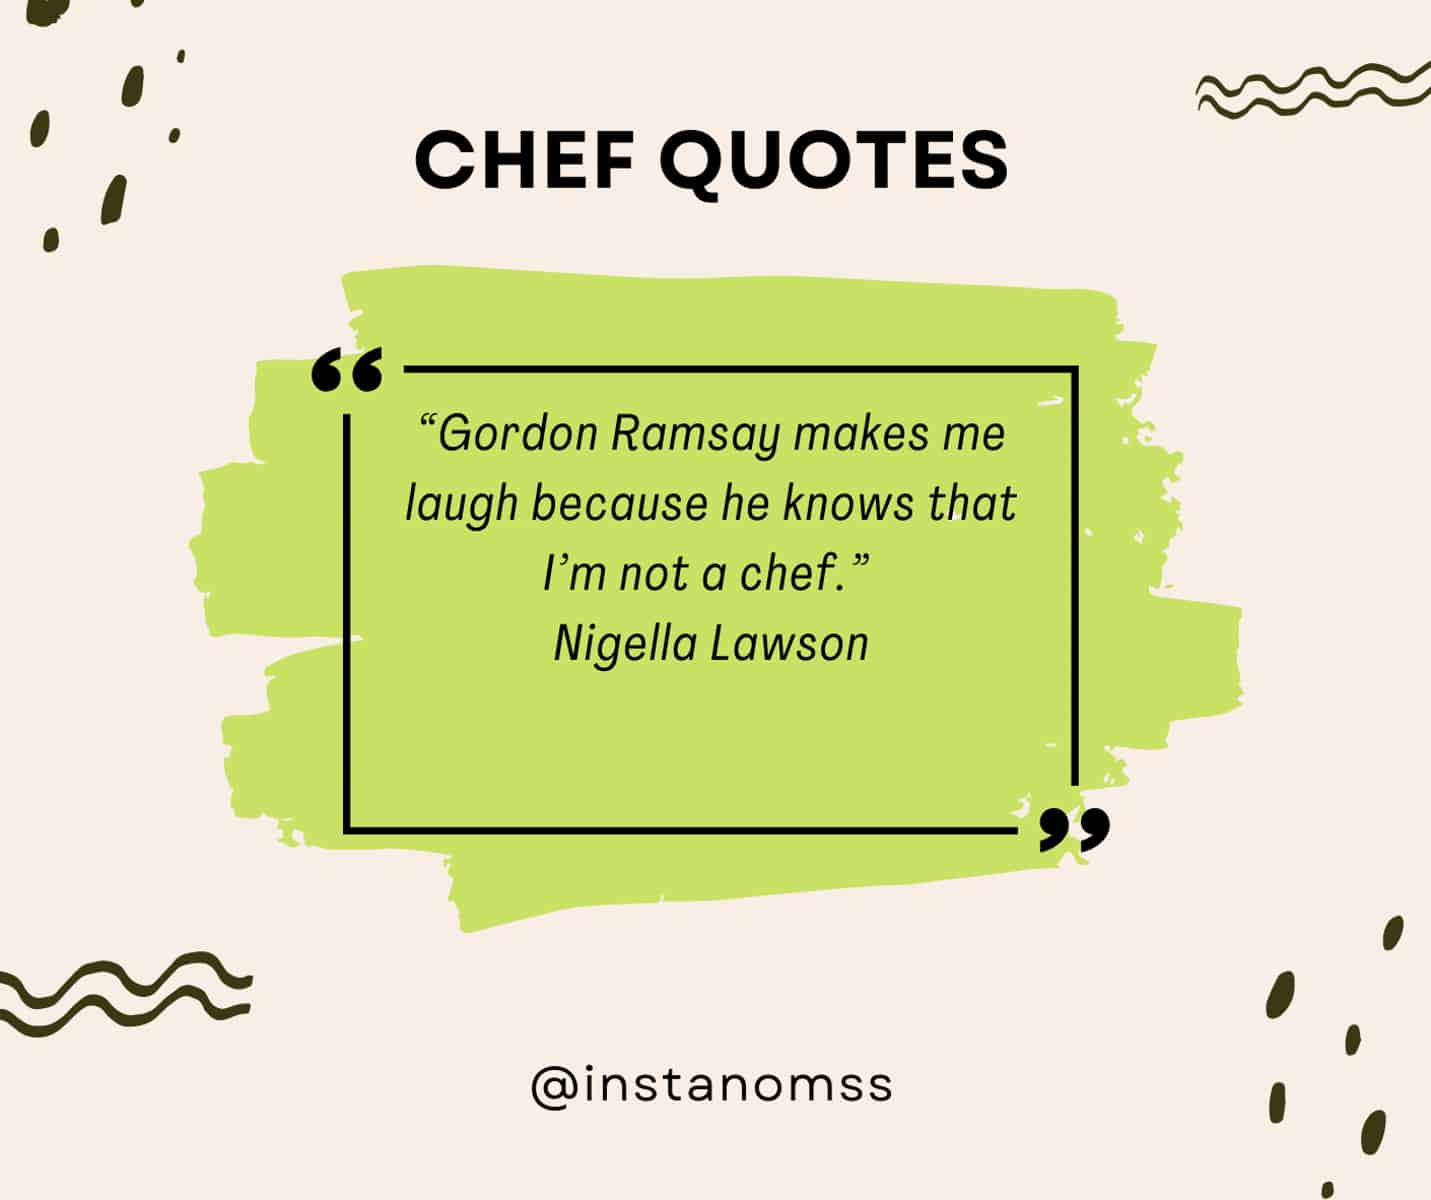 “Gordon Ramsay makes me laugh because he knows that I’m not a chef.” Nigella Lawson